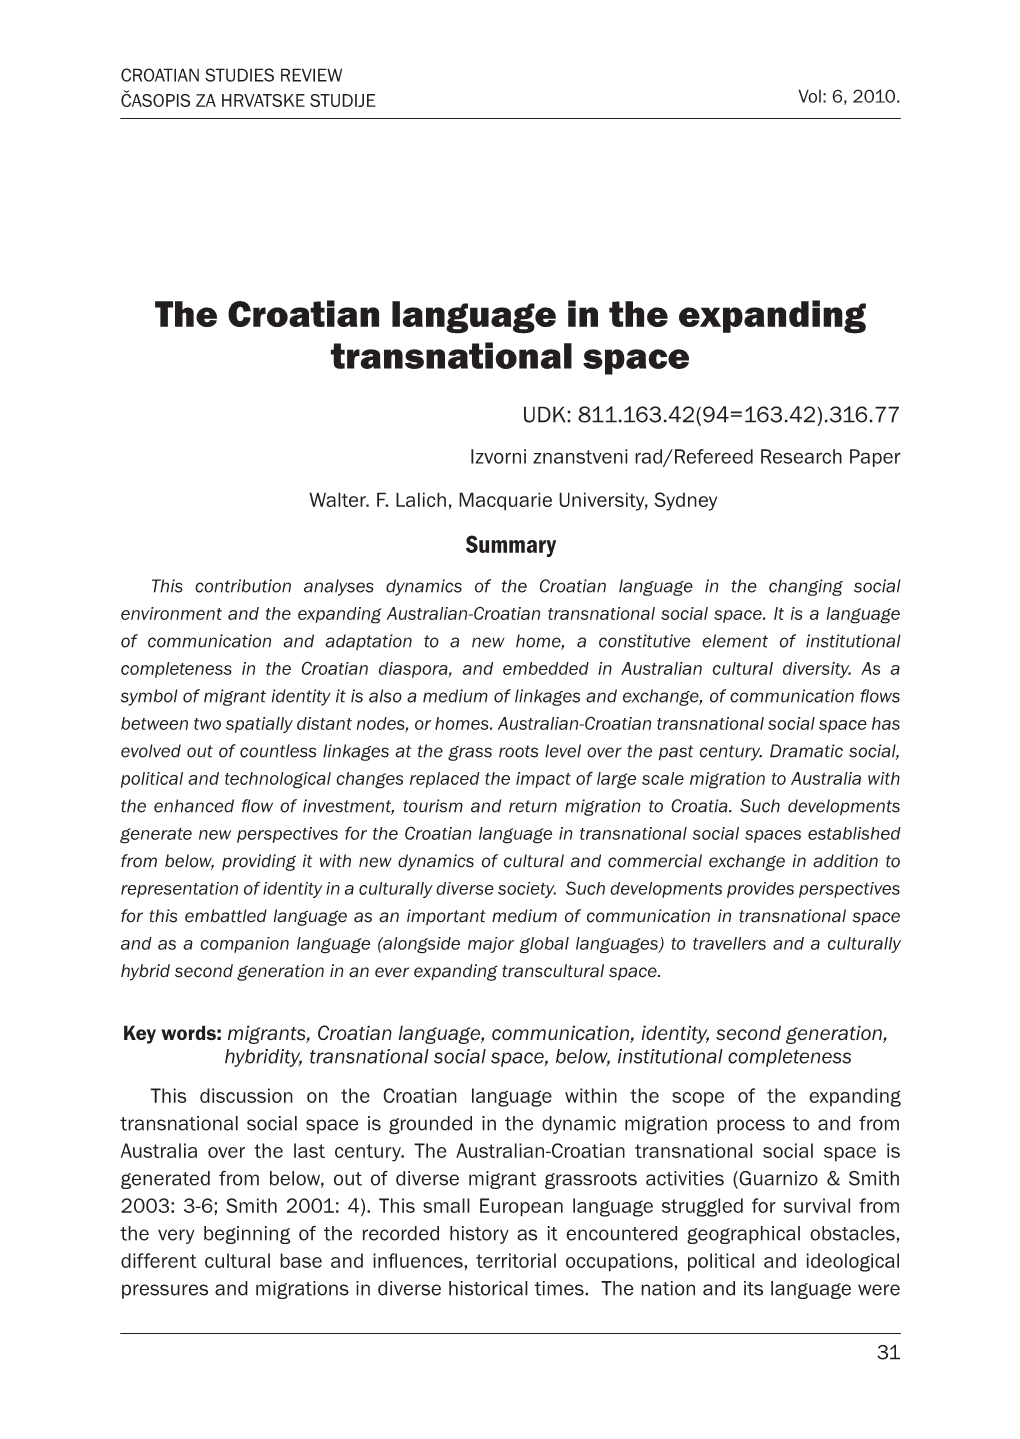 The Croatian Language in the Expanding Transnational Space